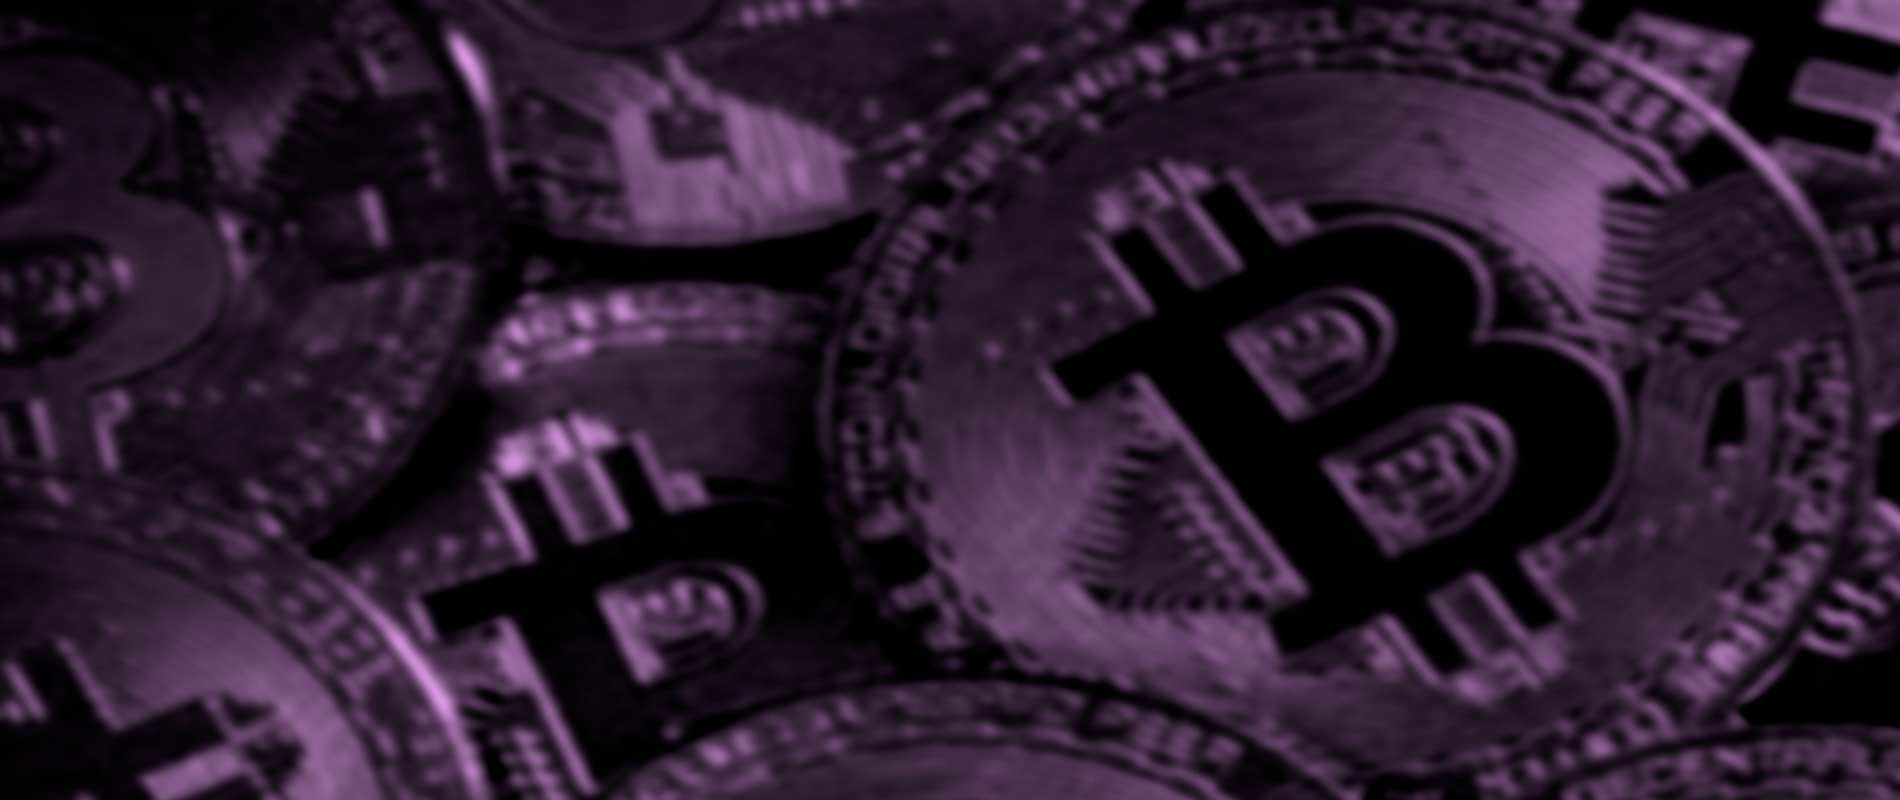 More bitcoin background